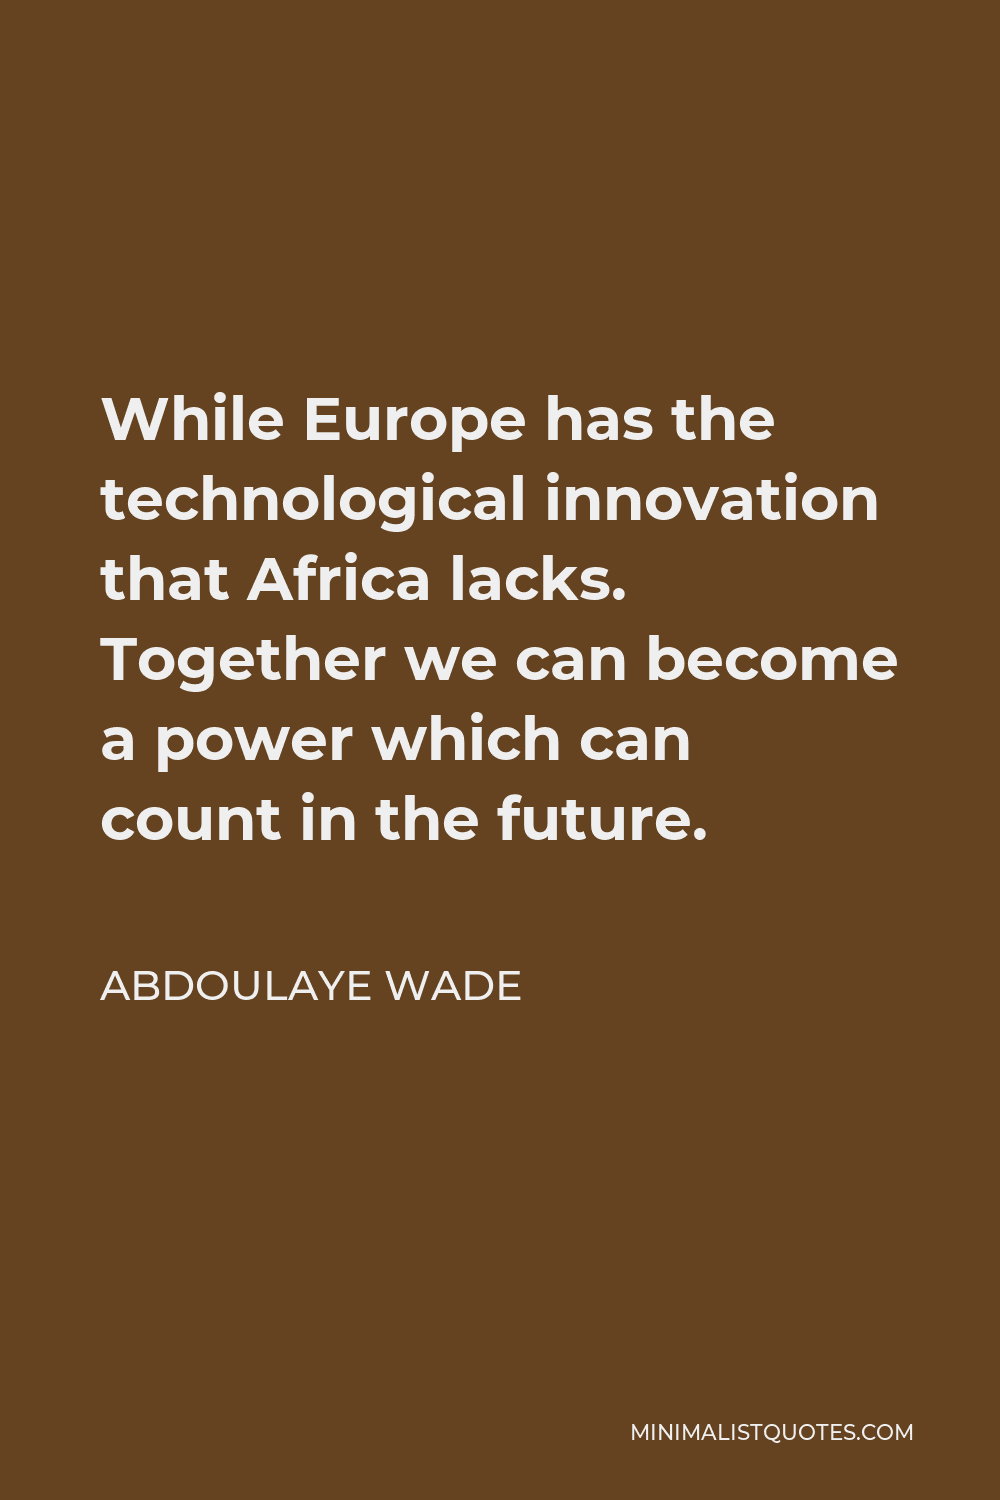 Abdoulaye Wade Quote - While Europe has the technological innovation that Africa lacks. Together we can become a power which can count in the future.